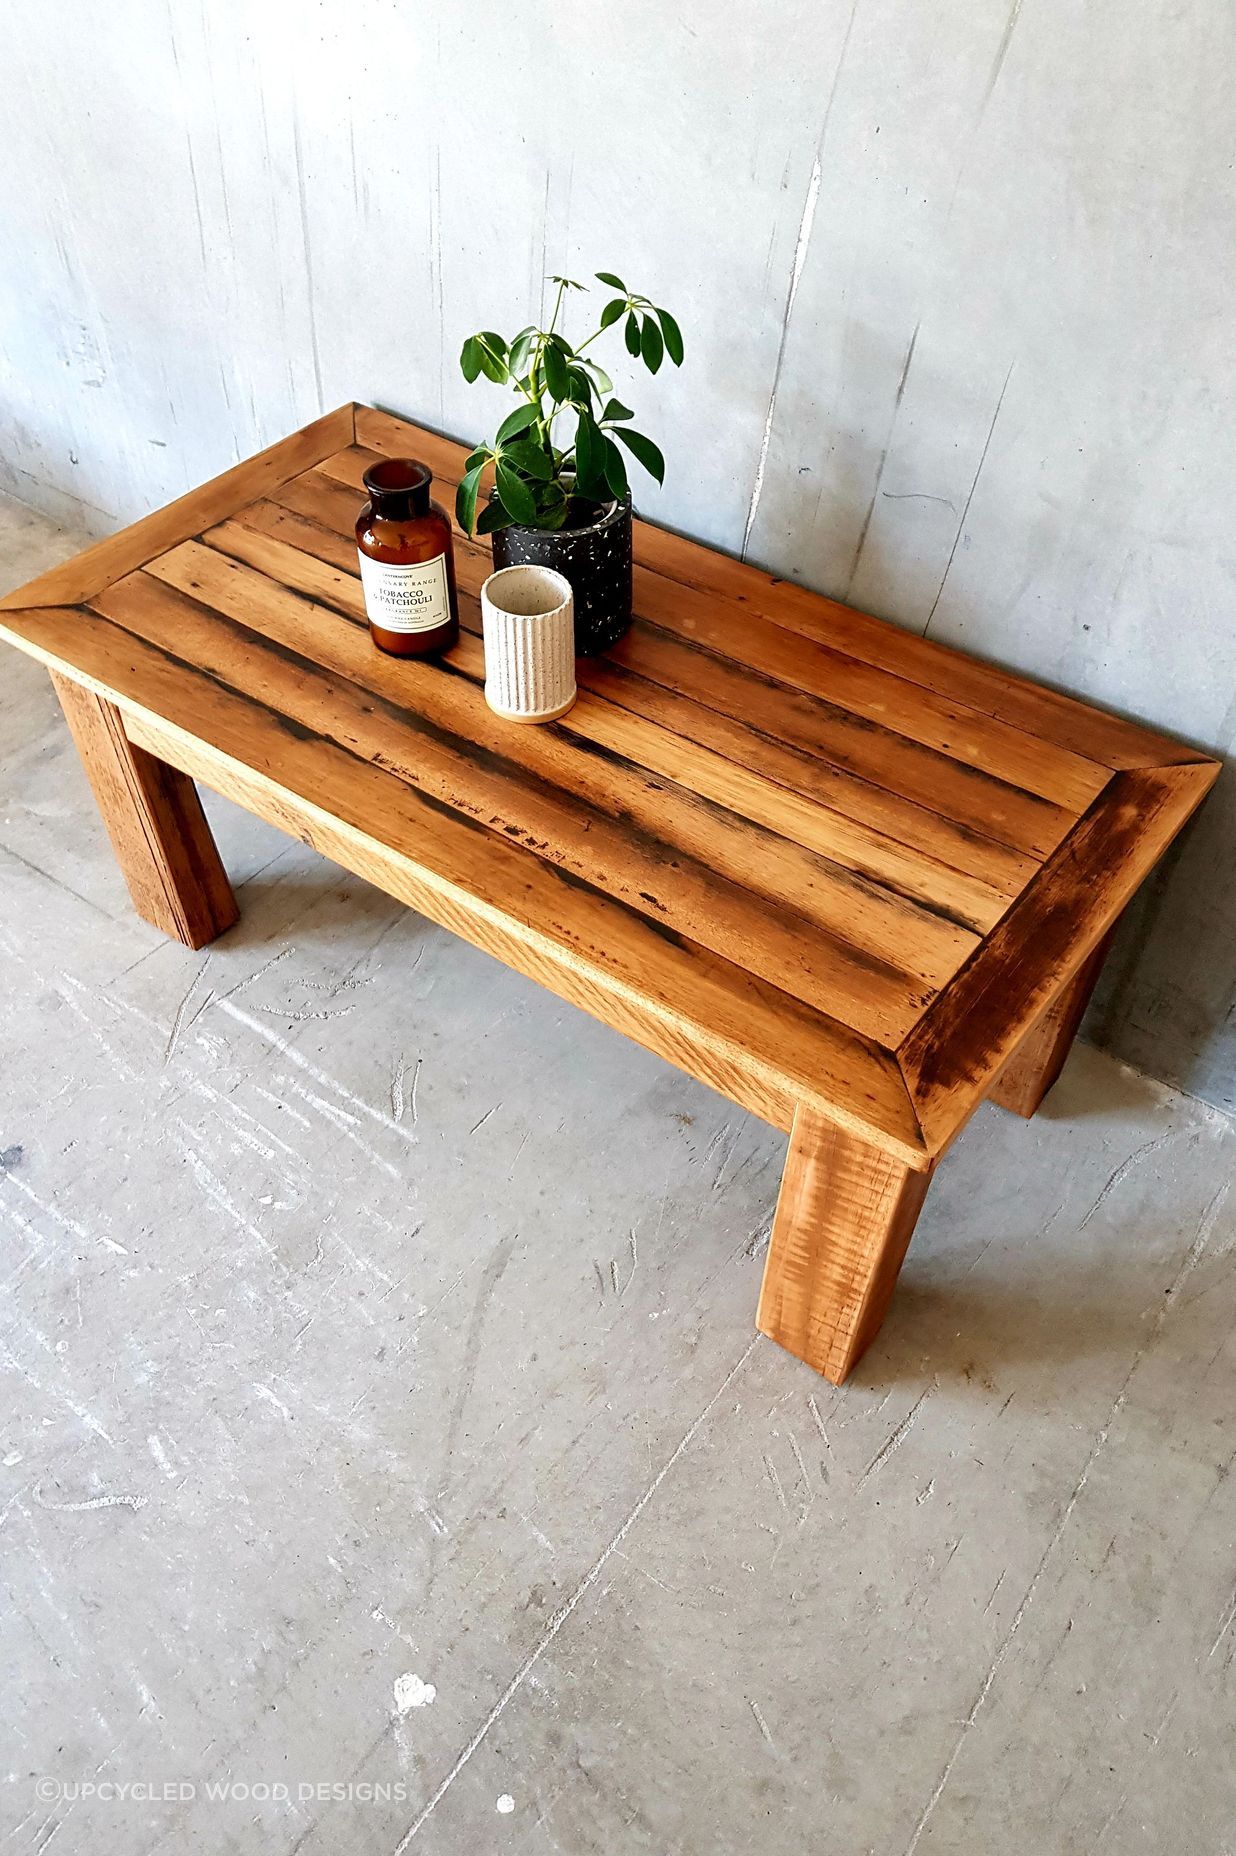 Reclaimed hardwood coffee tables offer exquisite natural colours. Featured product: The Woodhouse 45 Reclaimed Hardwood Coffee Table.